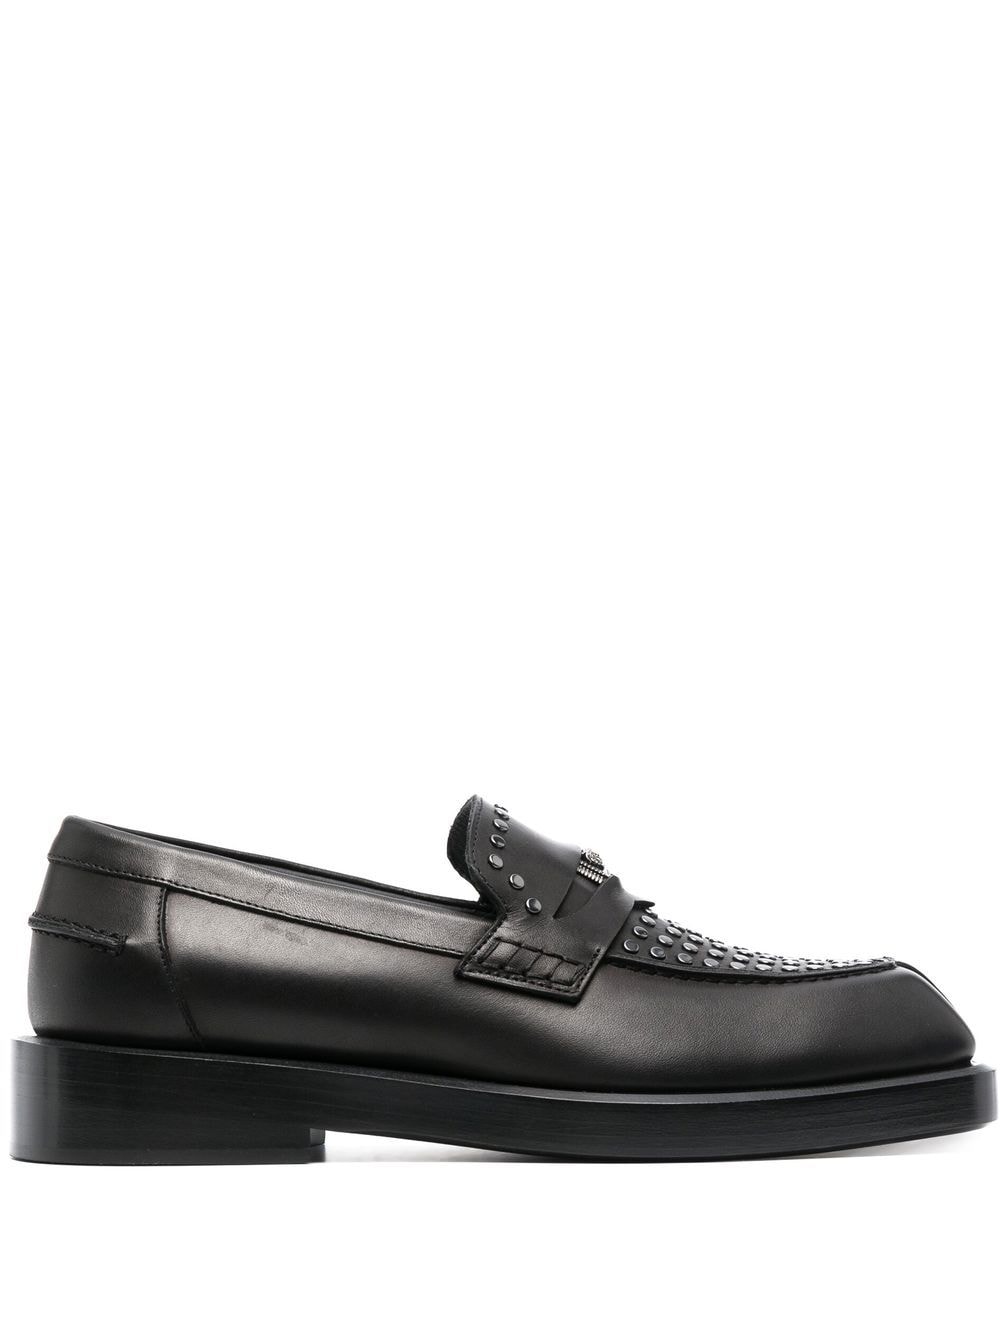 Versace square-toe studded loafers - Black